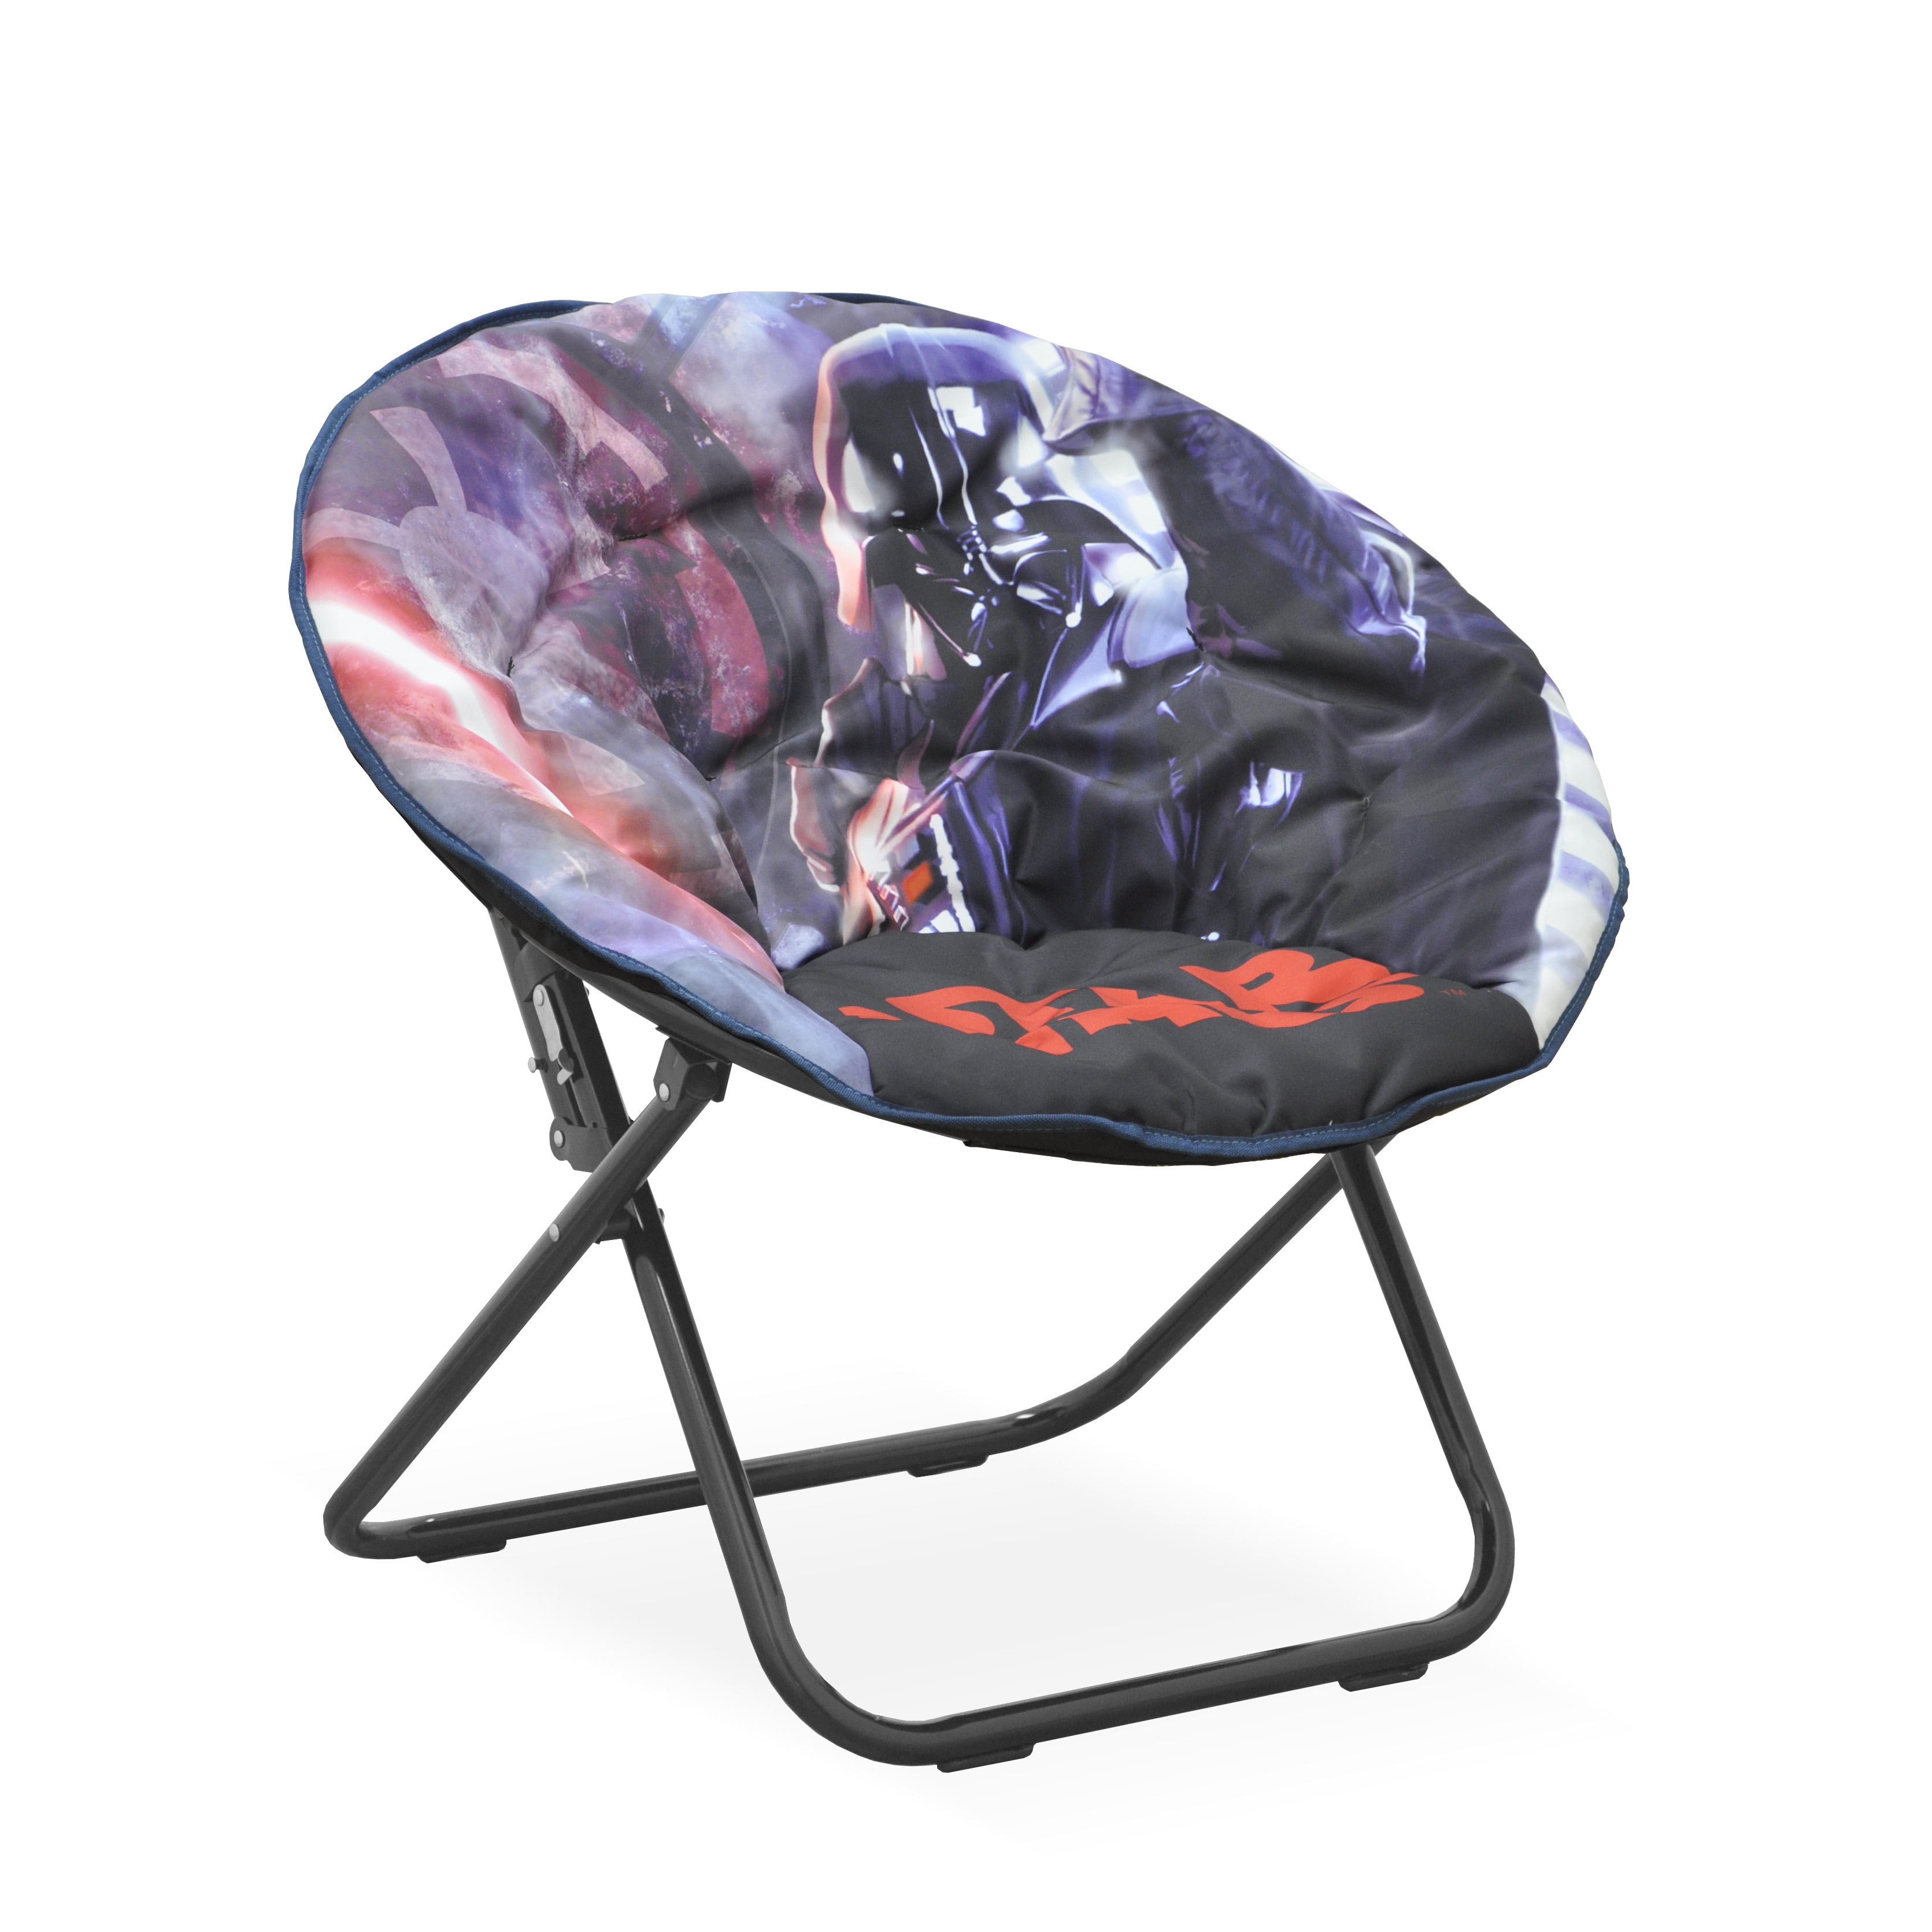 star wars multicolored polyestermetal kids saucer chair